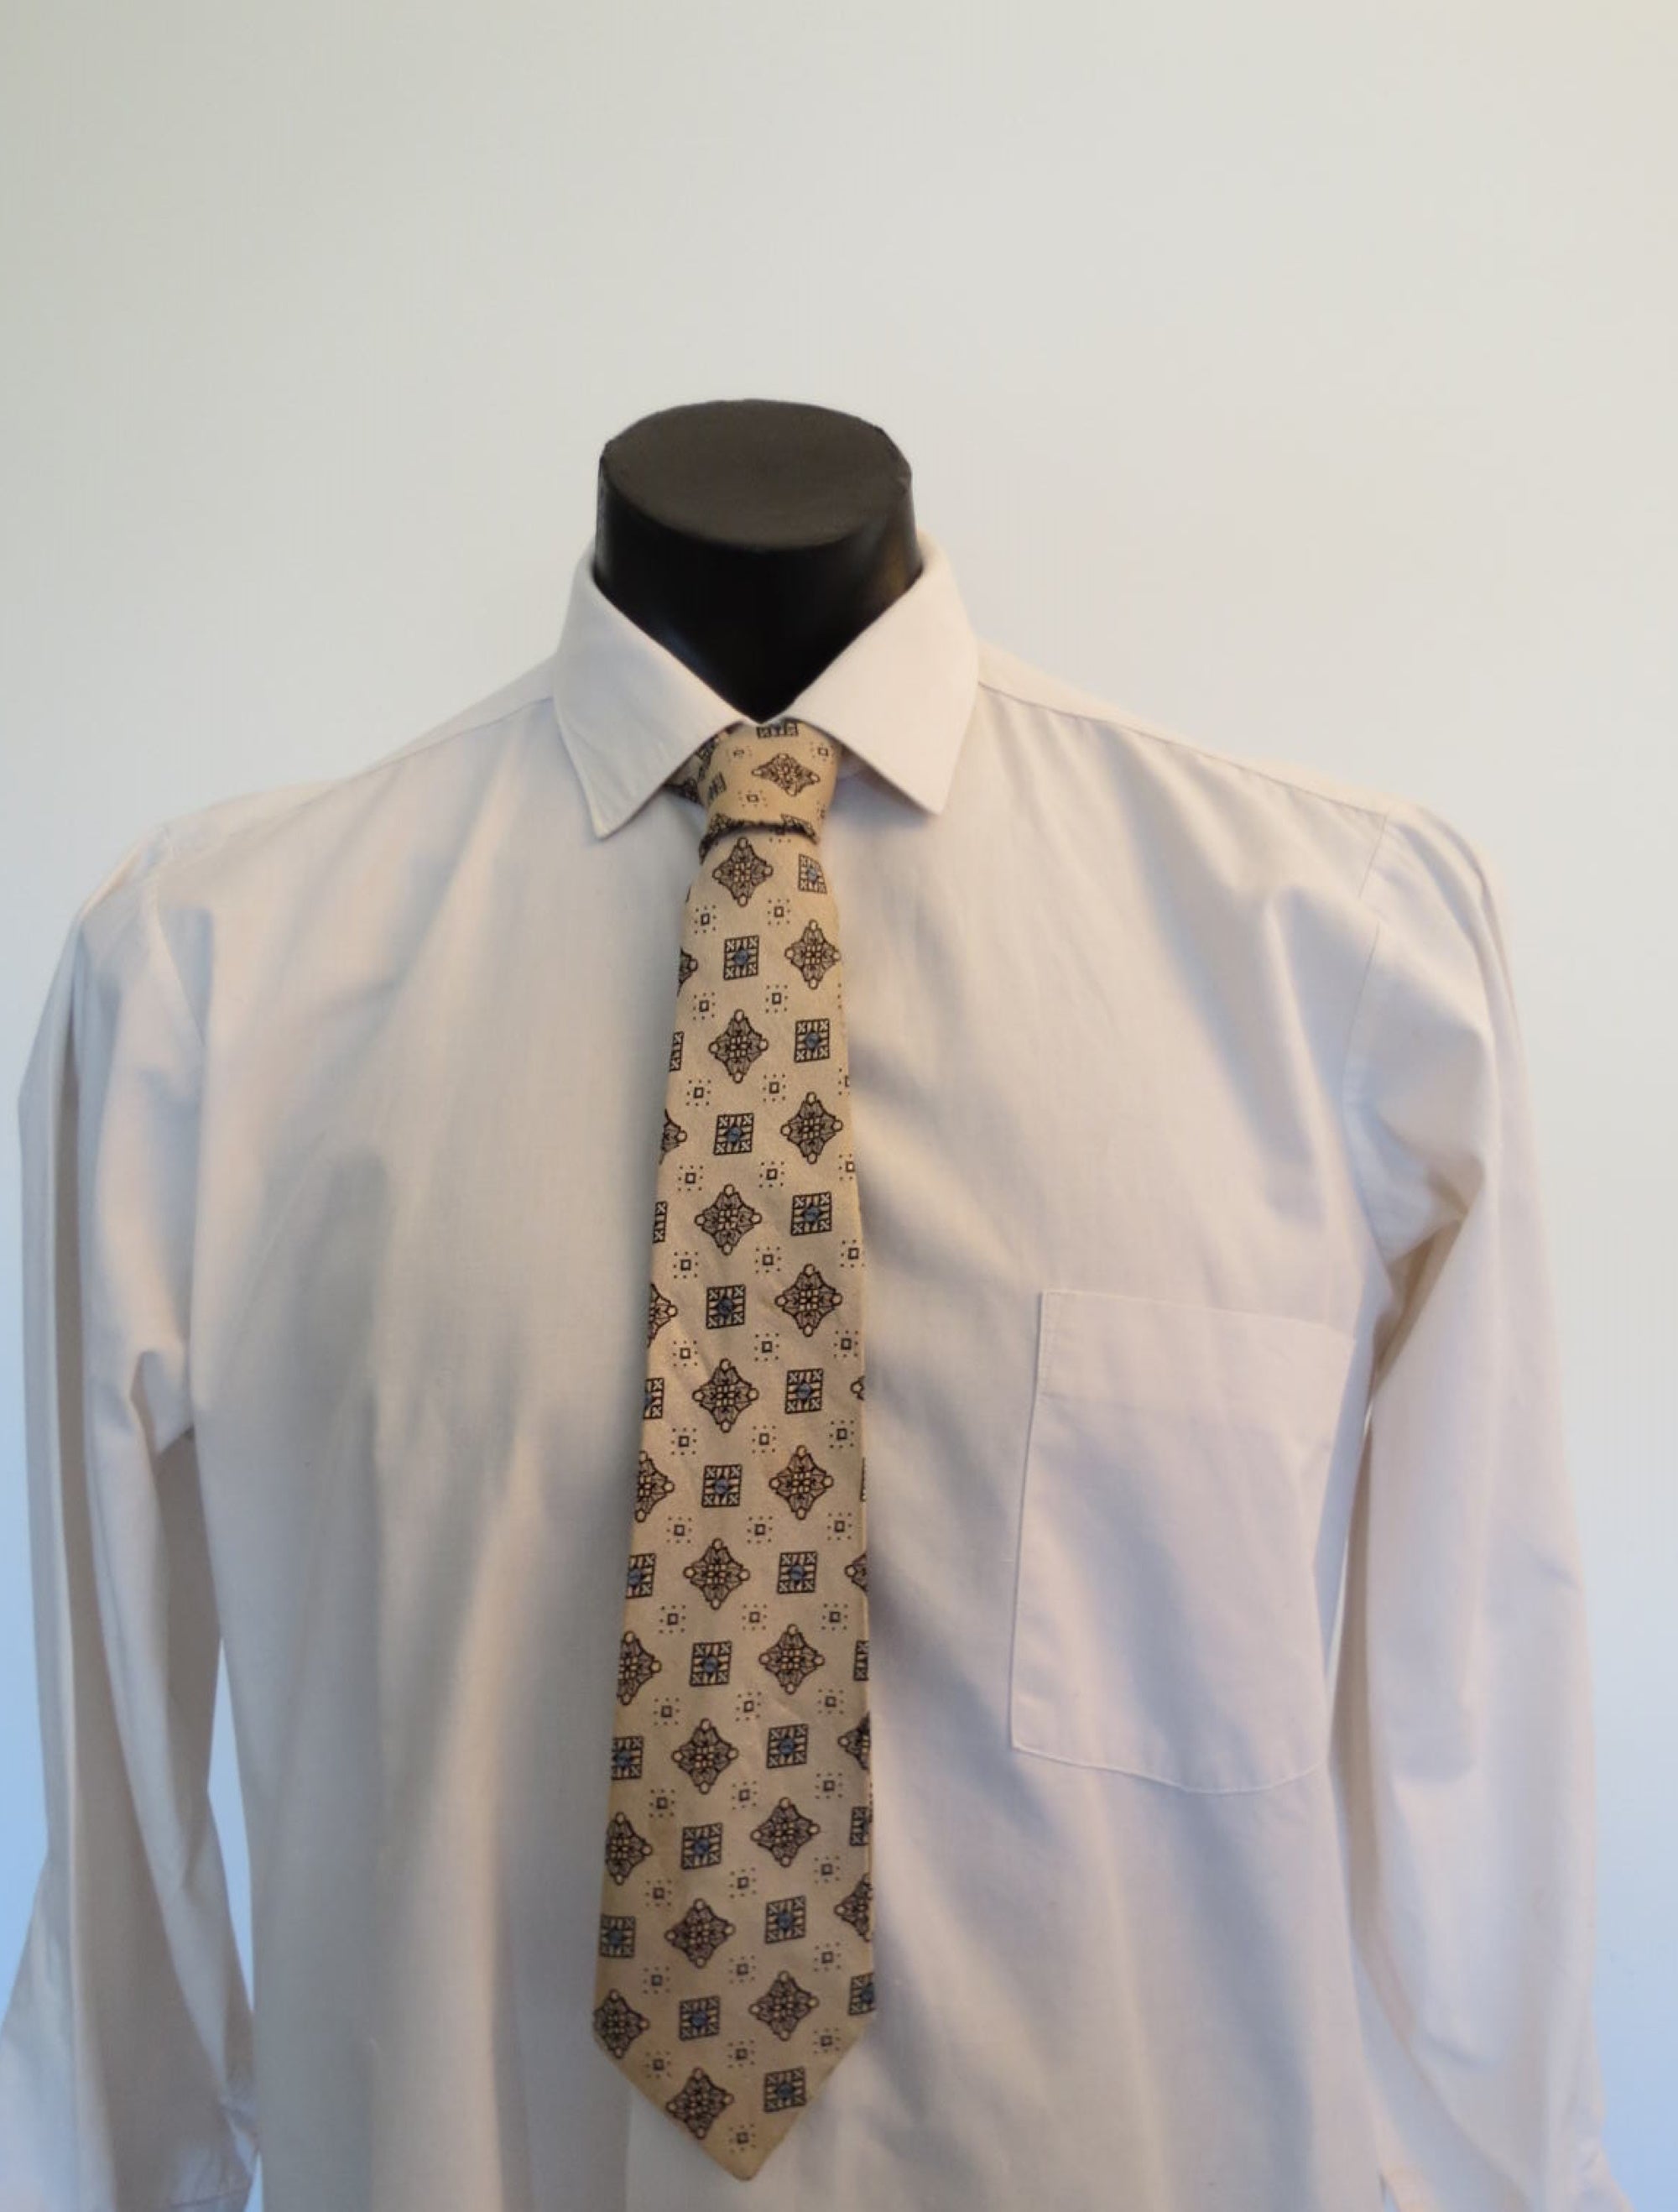 Metallic Beige or Pale Gold Tie with Gold Lozenges, a Fortescue Cravat - 1950s